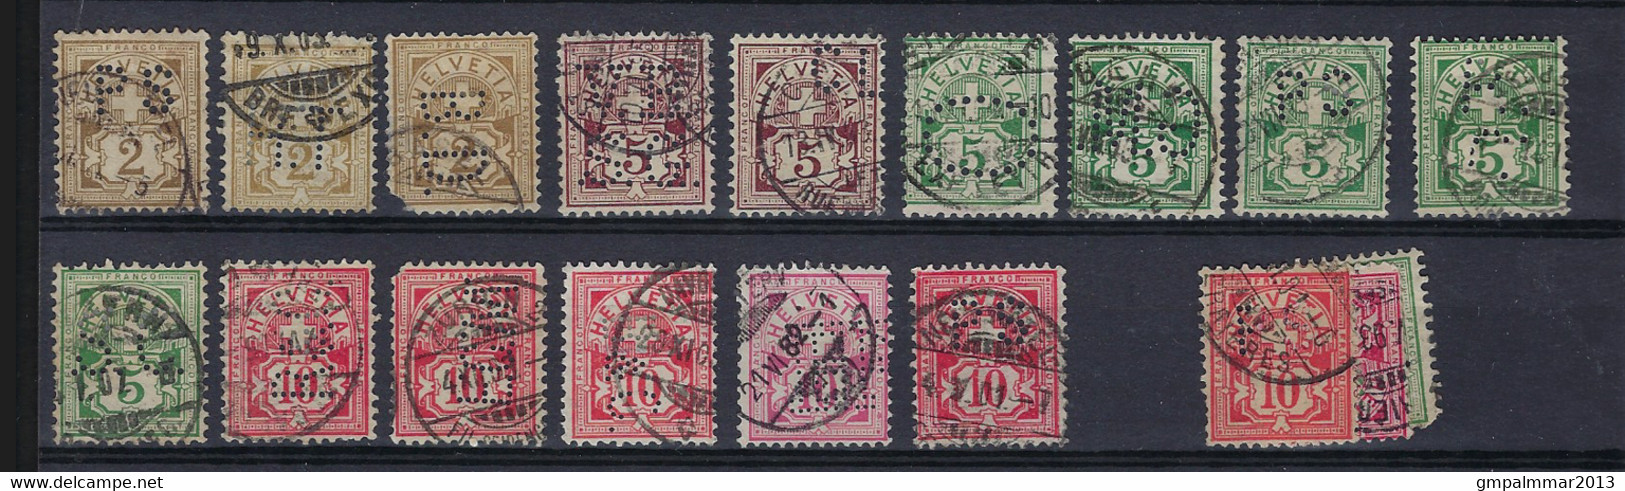 PERFIN / PERFO Suisse  /  Switzerland  1883   15  Stamps All Different Combinations ; Details See 2 Scans ! LOT 105 - Perforadas